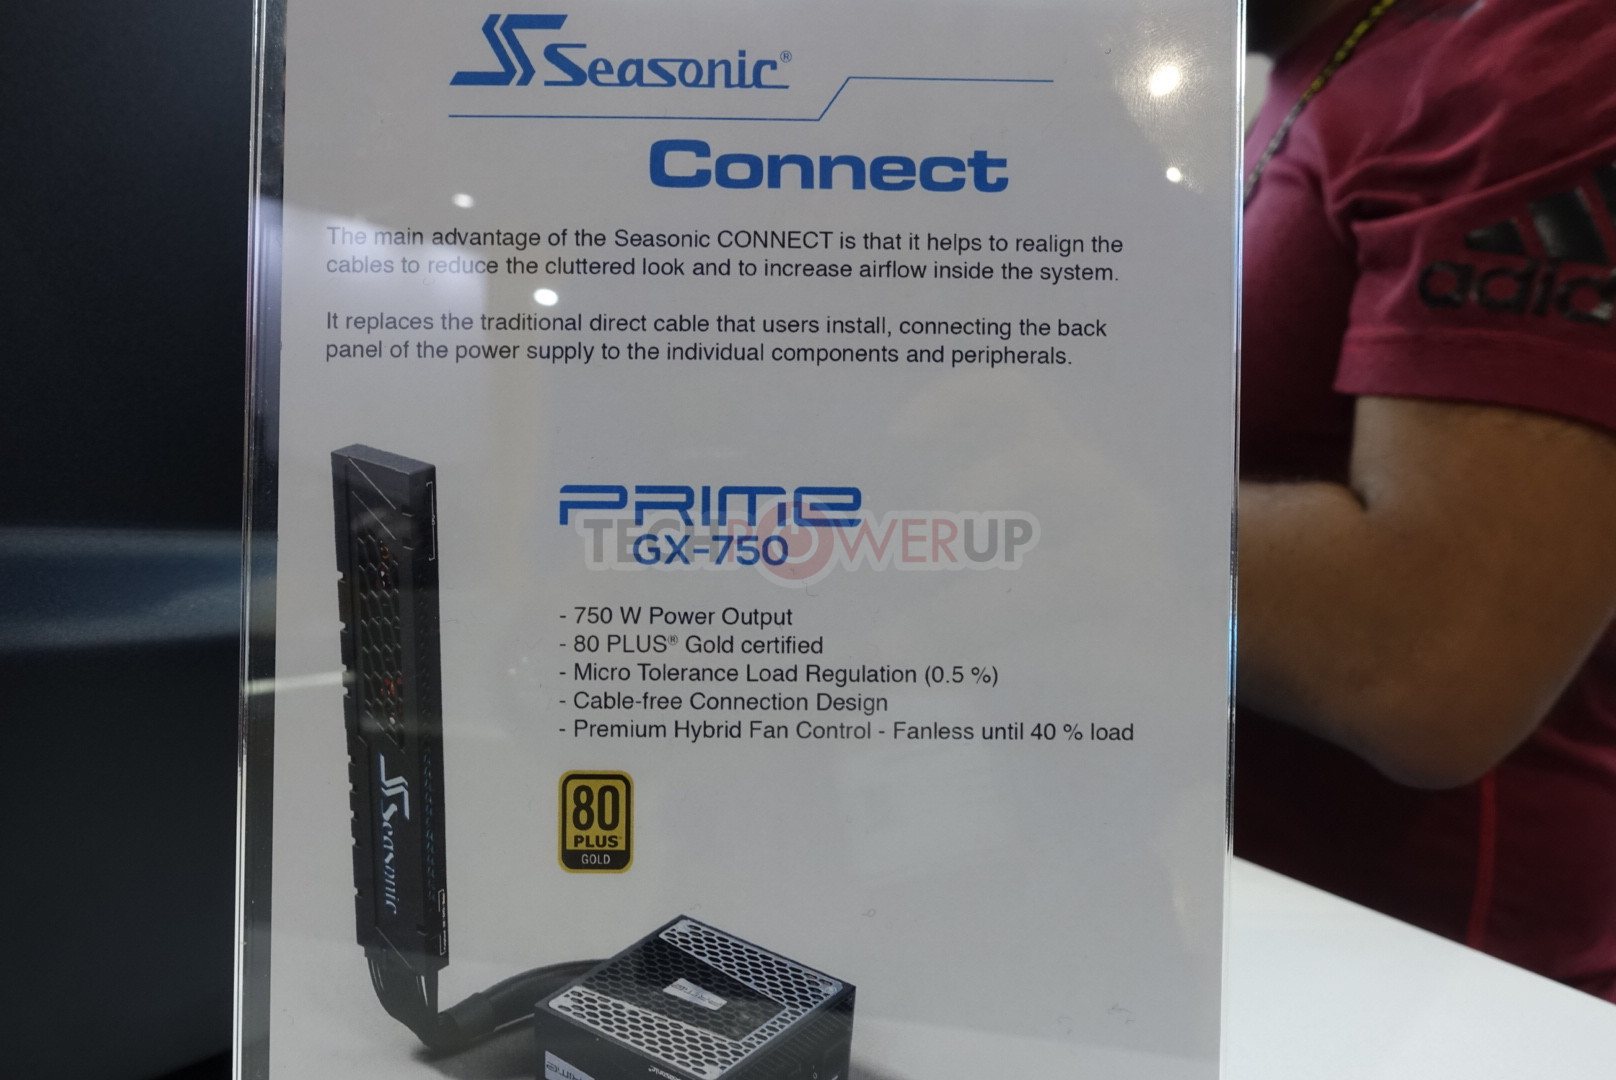 Seasonic made a PSU for people who struggle with cable management